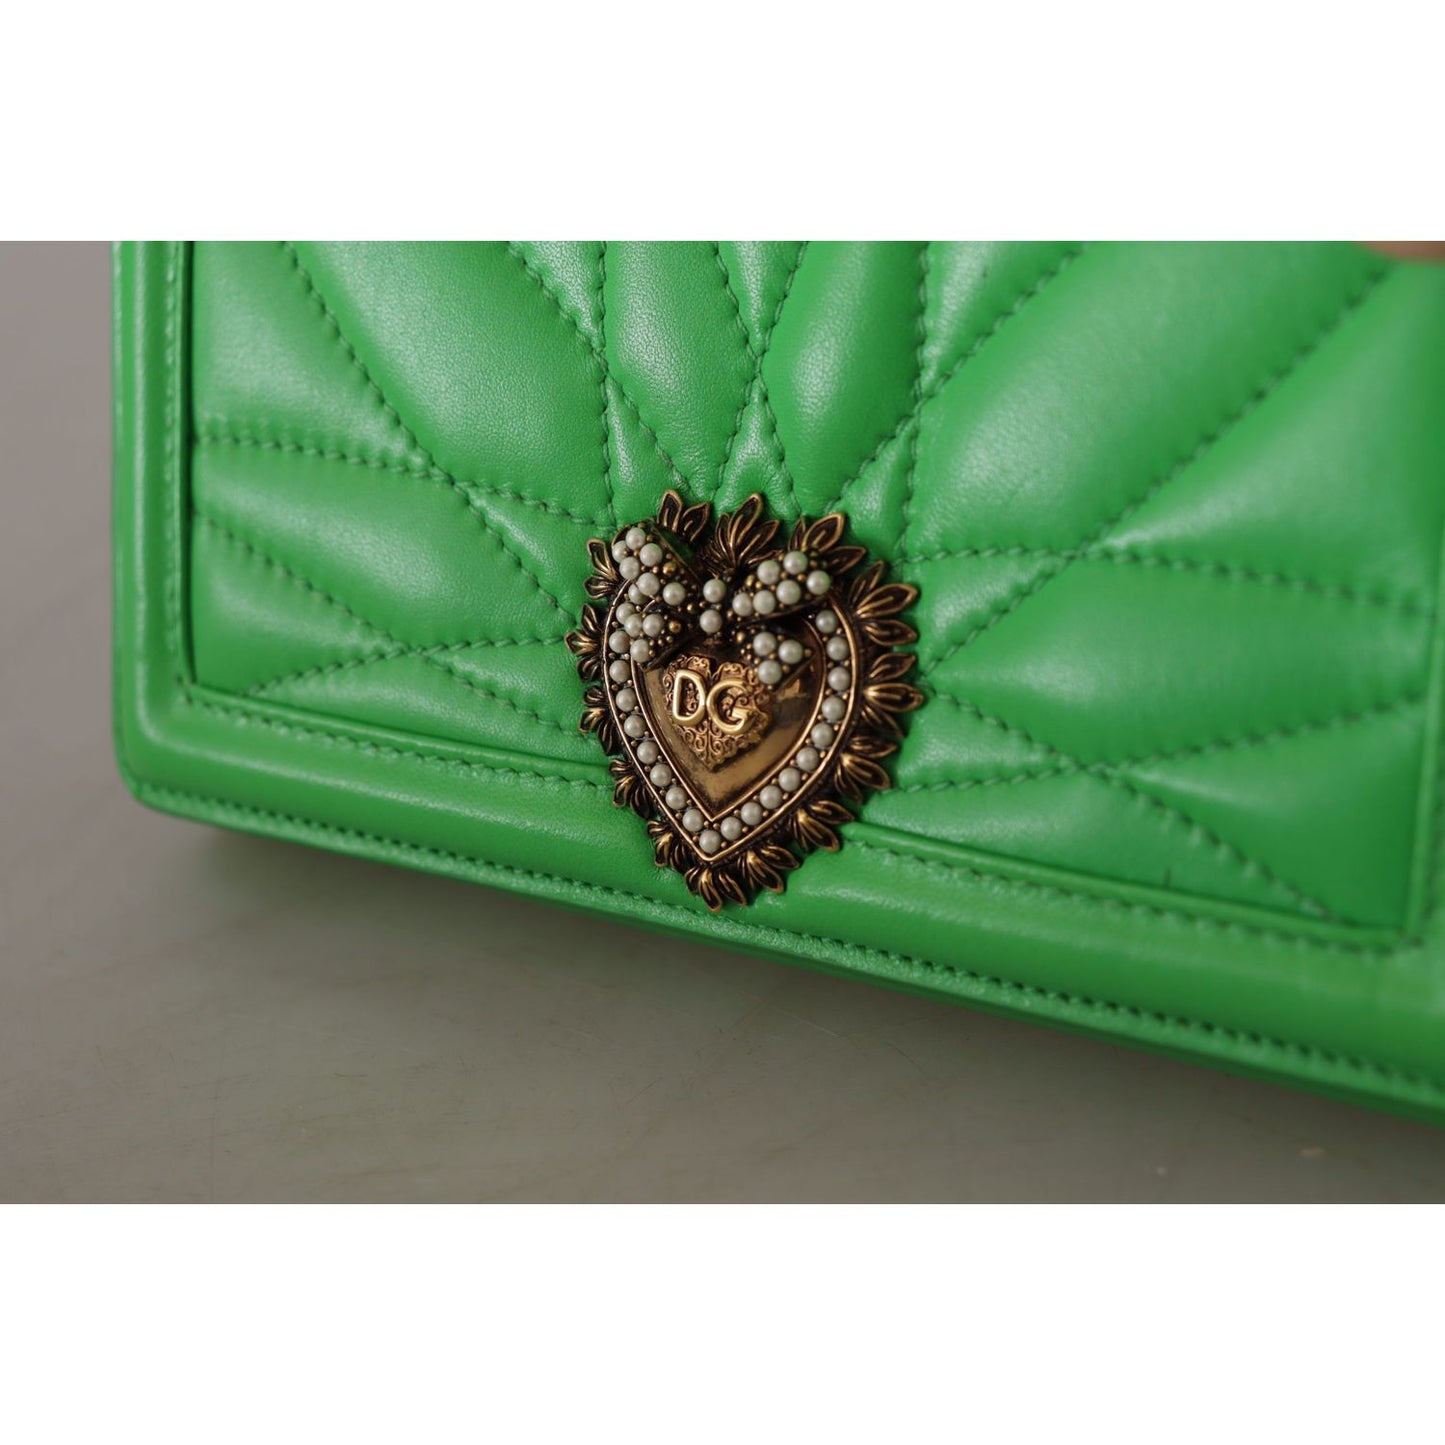 Dolce & Gabbana Elegant Leather iPhone Wallet Case with Chain green-leather-devotion-cardholder-iphone-11-pro-wallet IMG_3542-1-scaled-0eafce7f-93c.jpg